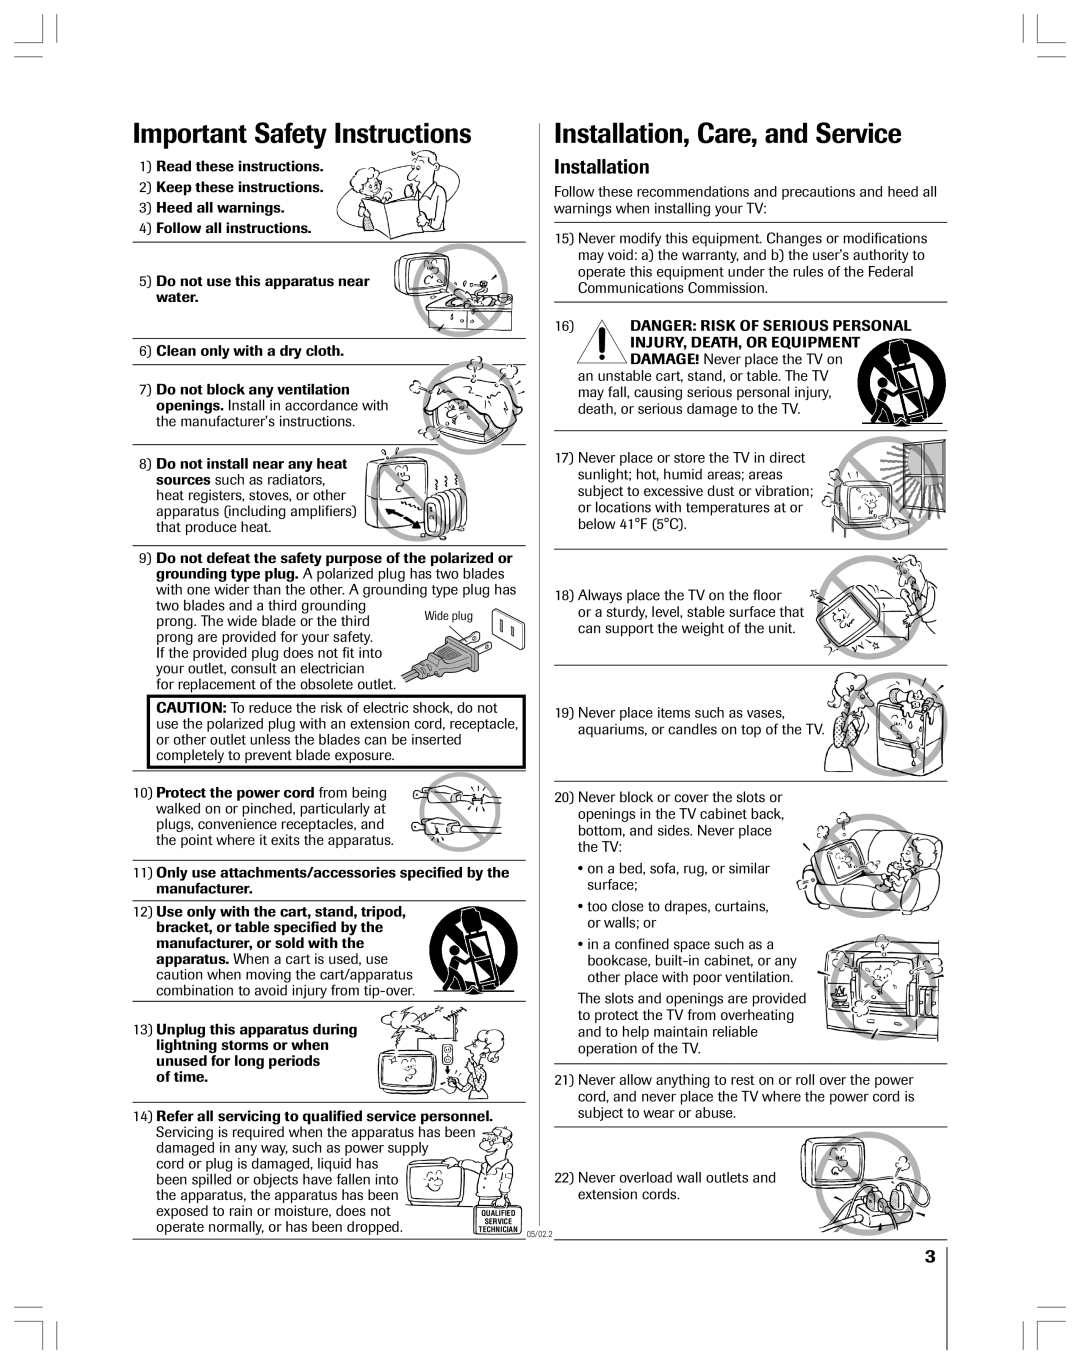 Toshiba 53AX62 Important Safety Instructions, Installation, Care, and Service, exposed to rain or moisture, does not 